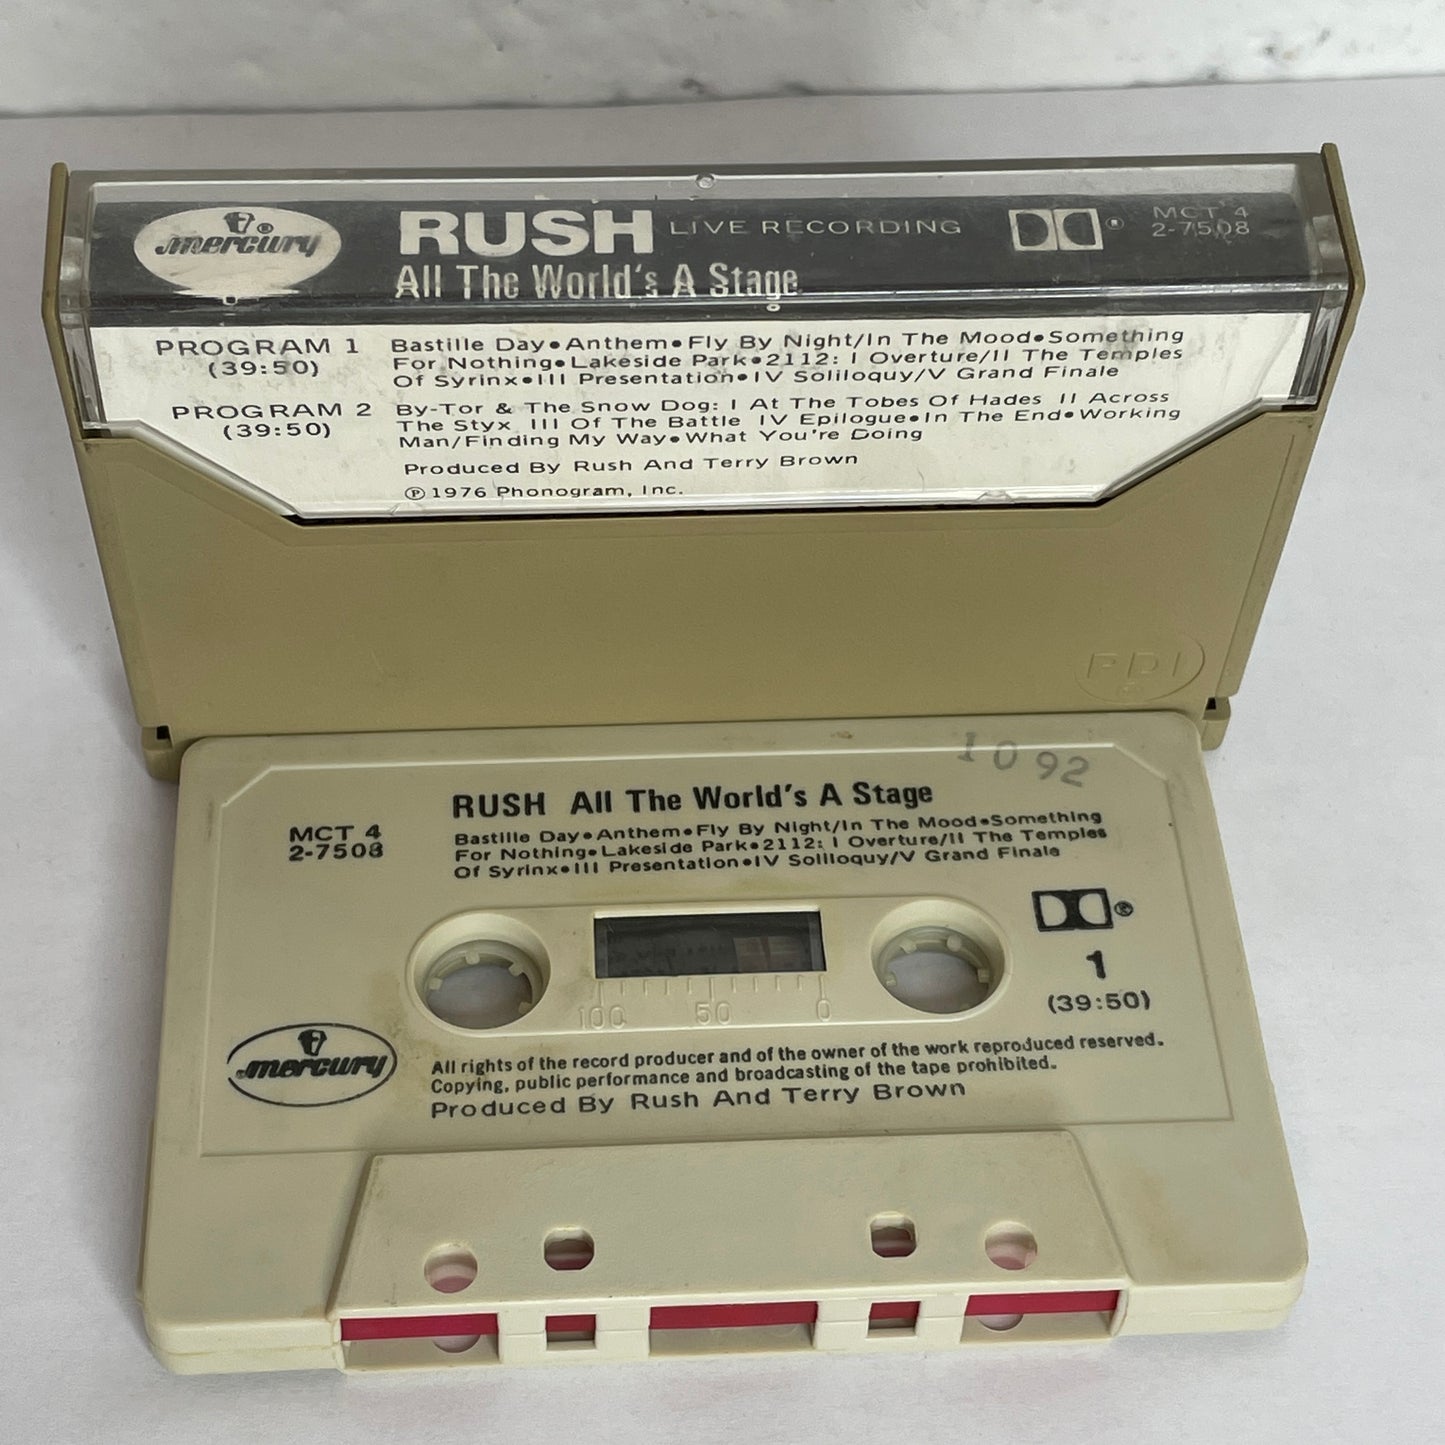 Rush - All the World's a Stage Live Recording original cassette tape